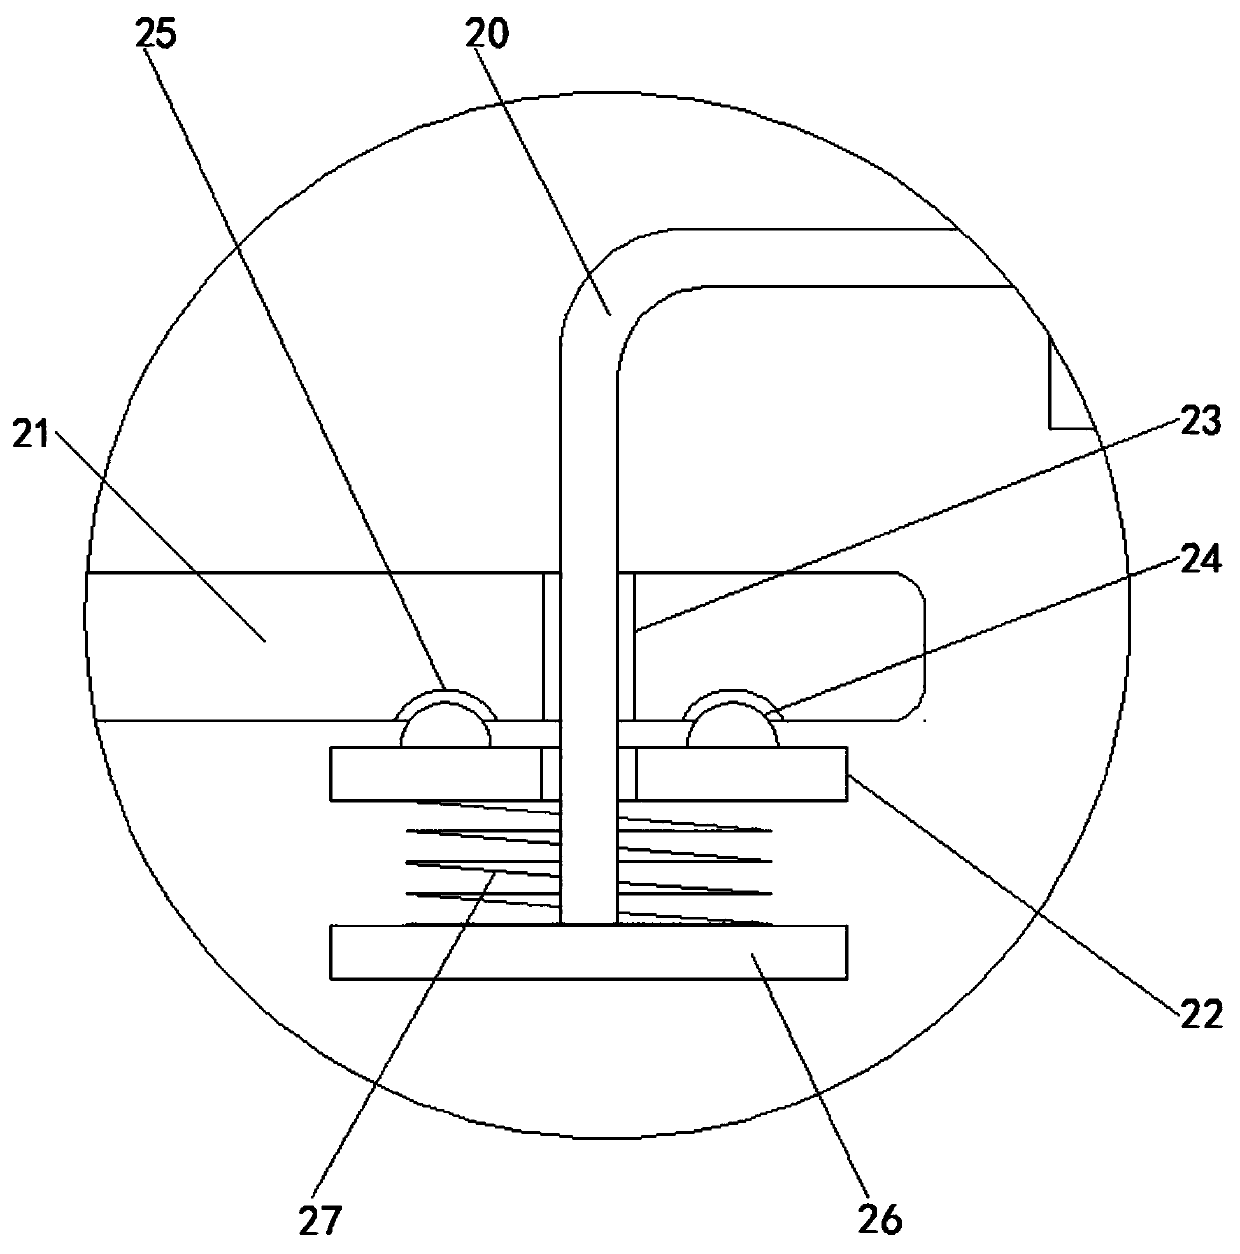 Rotating device for sewing hemming